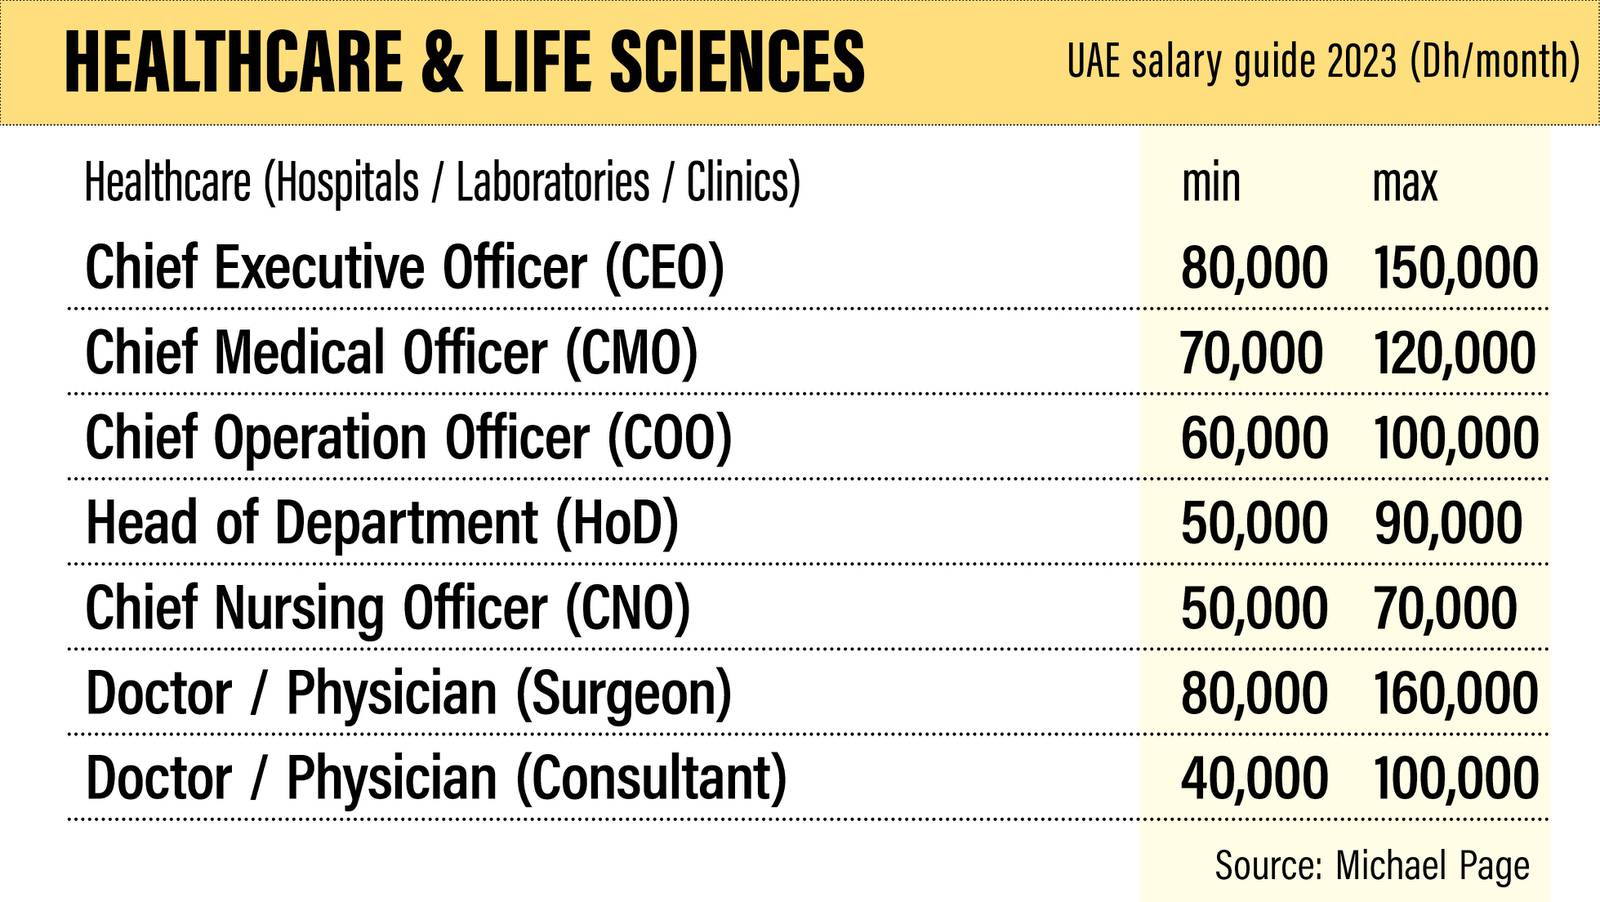 UAE salary guide 2023 How much should you be earning?